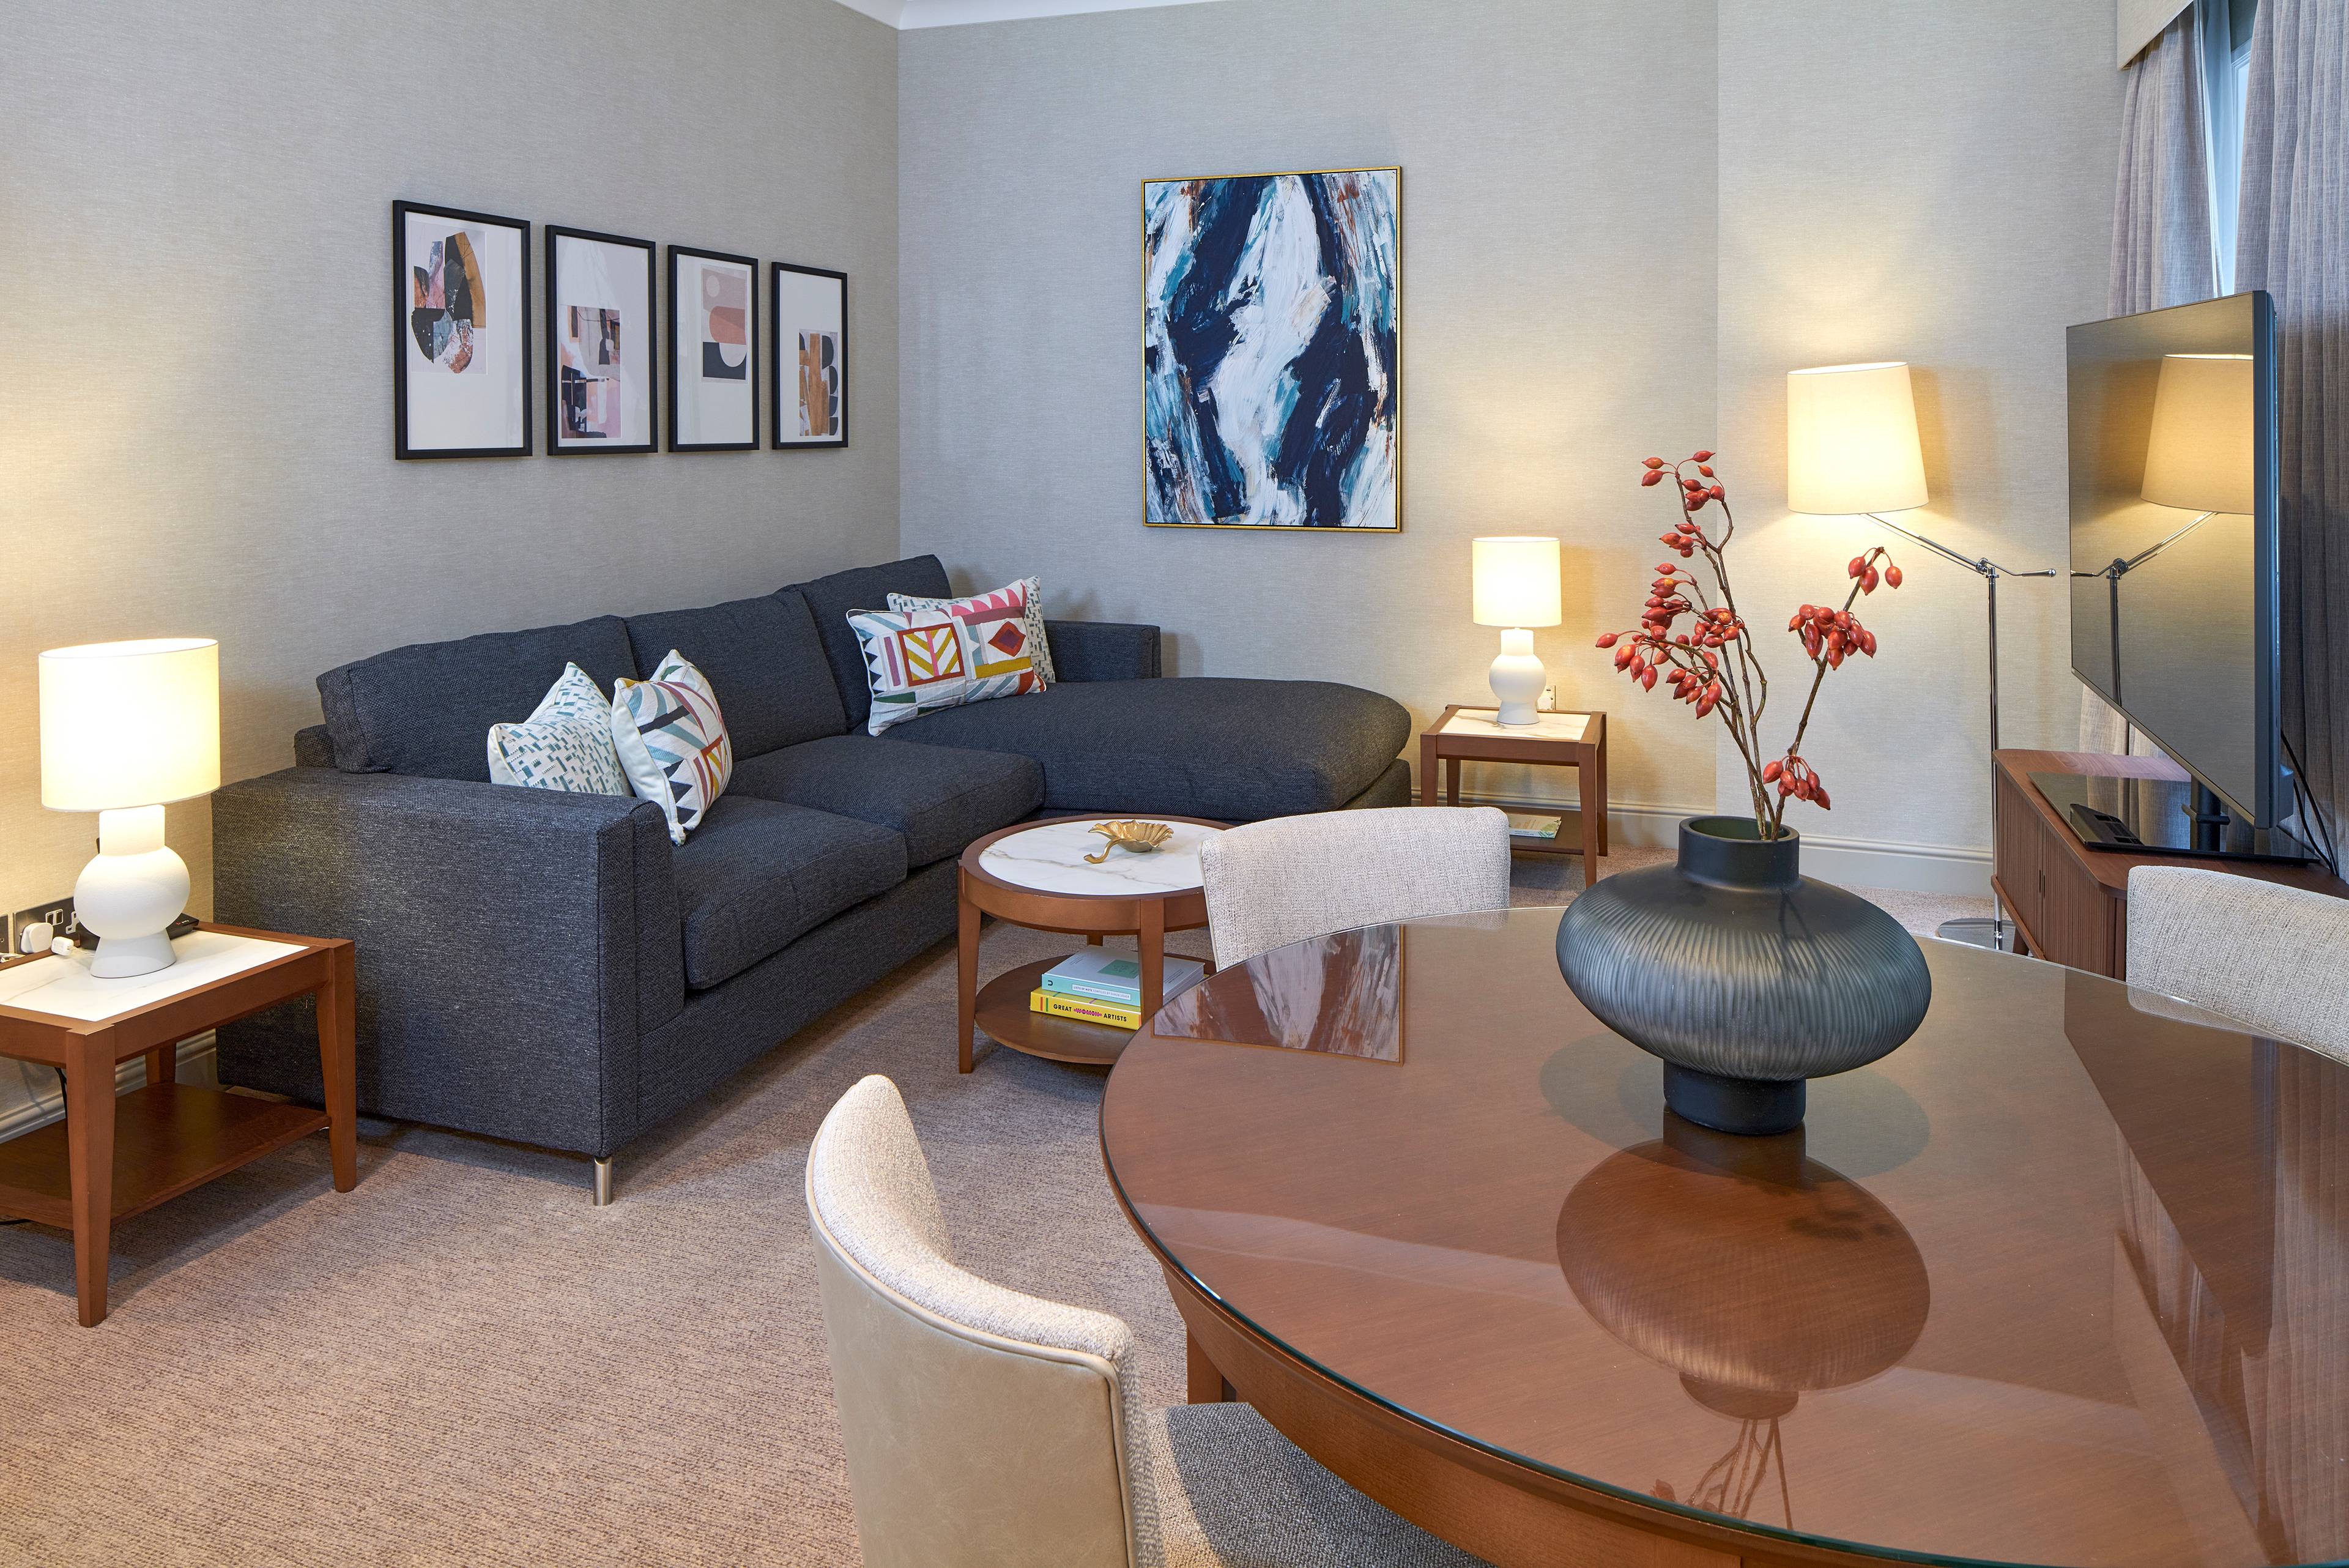 Newly Refurbished Luxury Two-Bedroom Serviced Apartment with premium amenities in the heart of the City of London